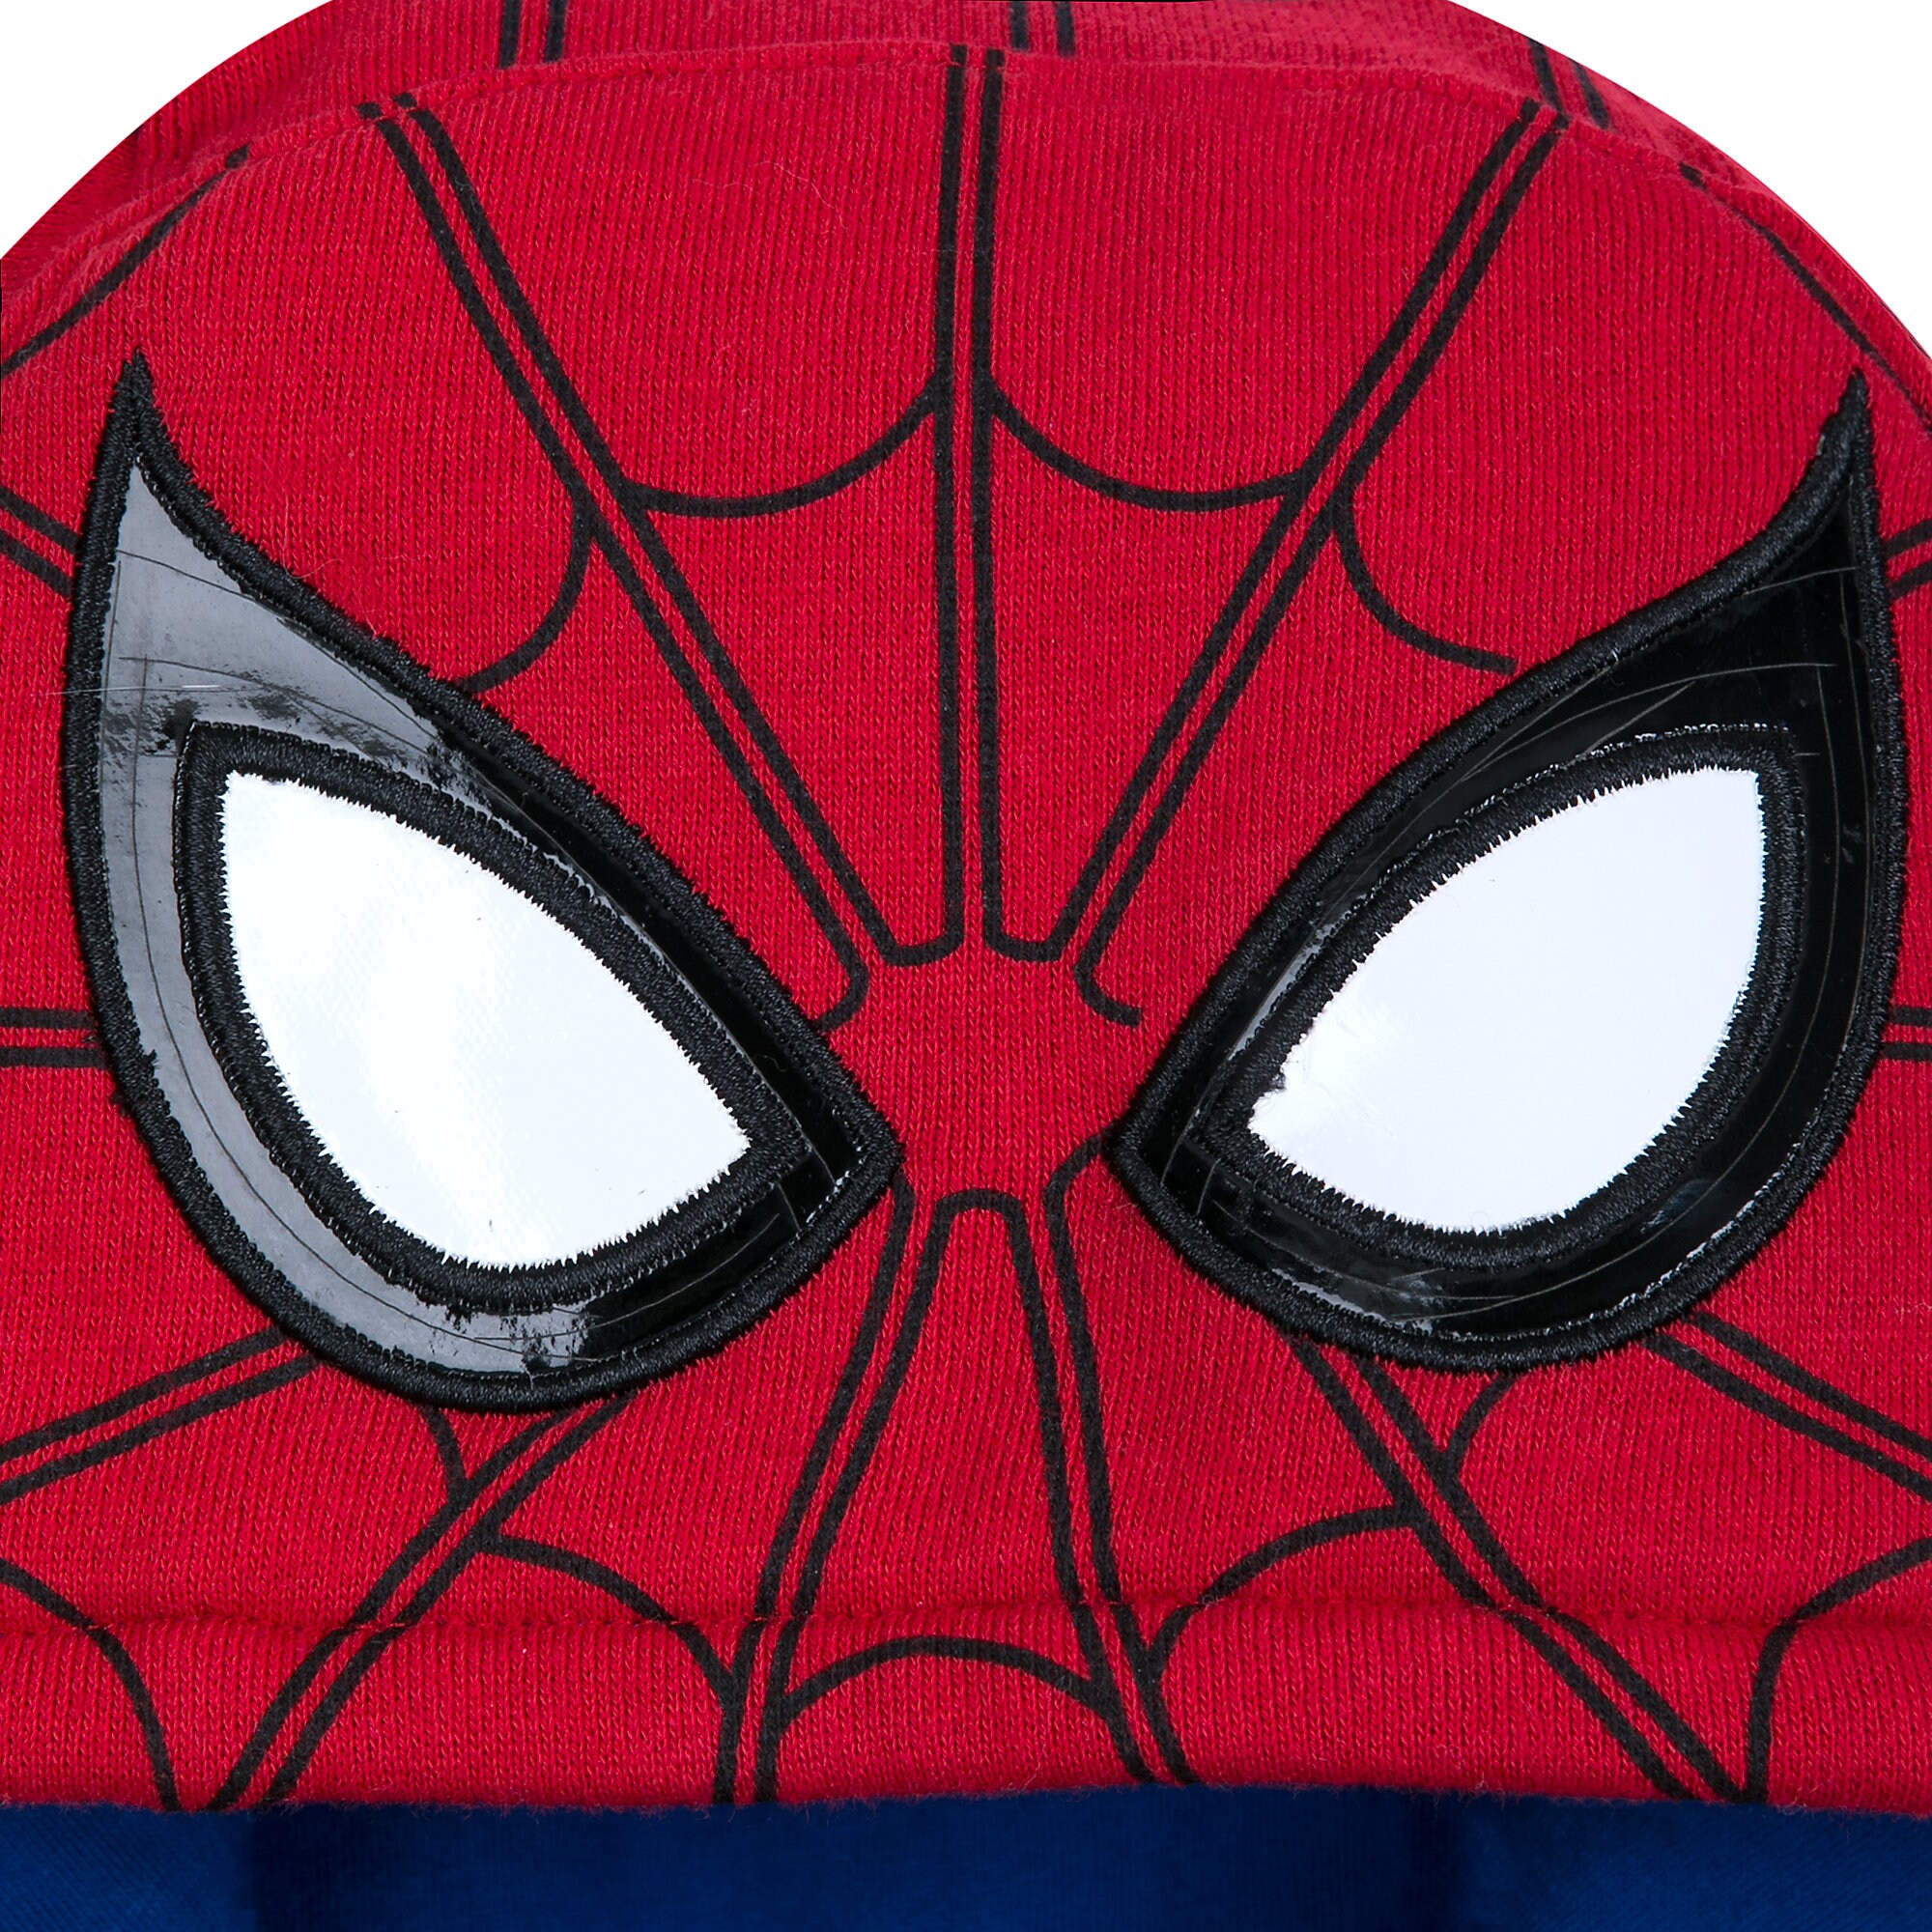 Spider-Man Hooded Jacket - Spider-Man: Far from Home